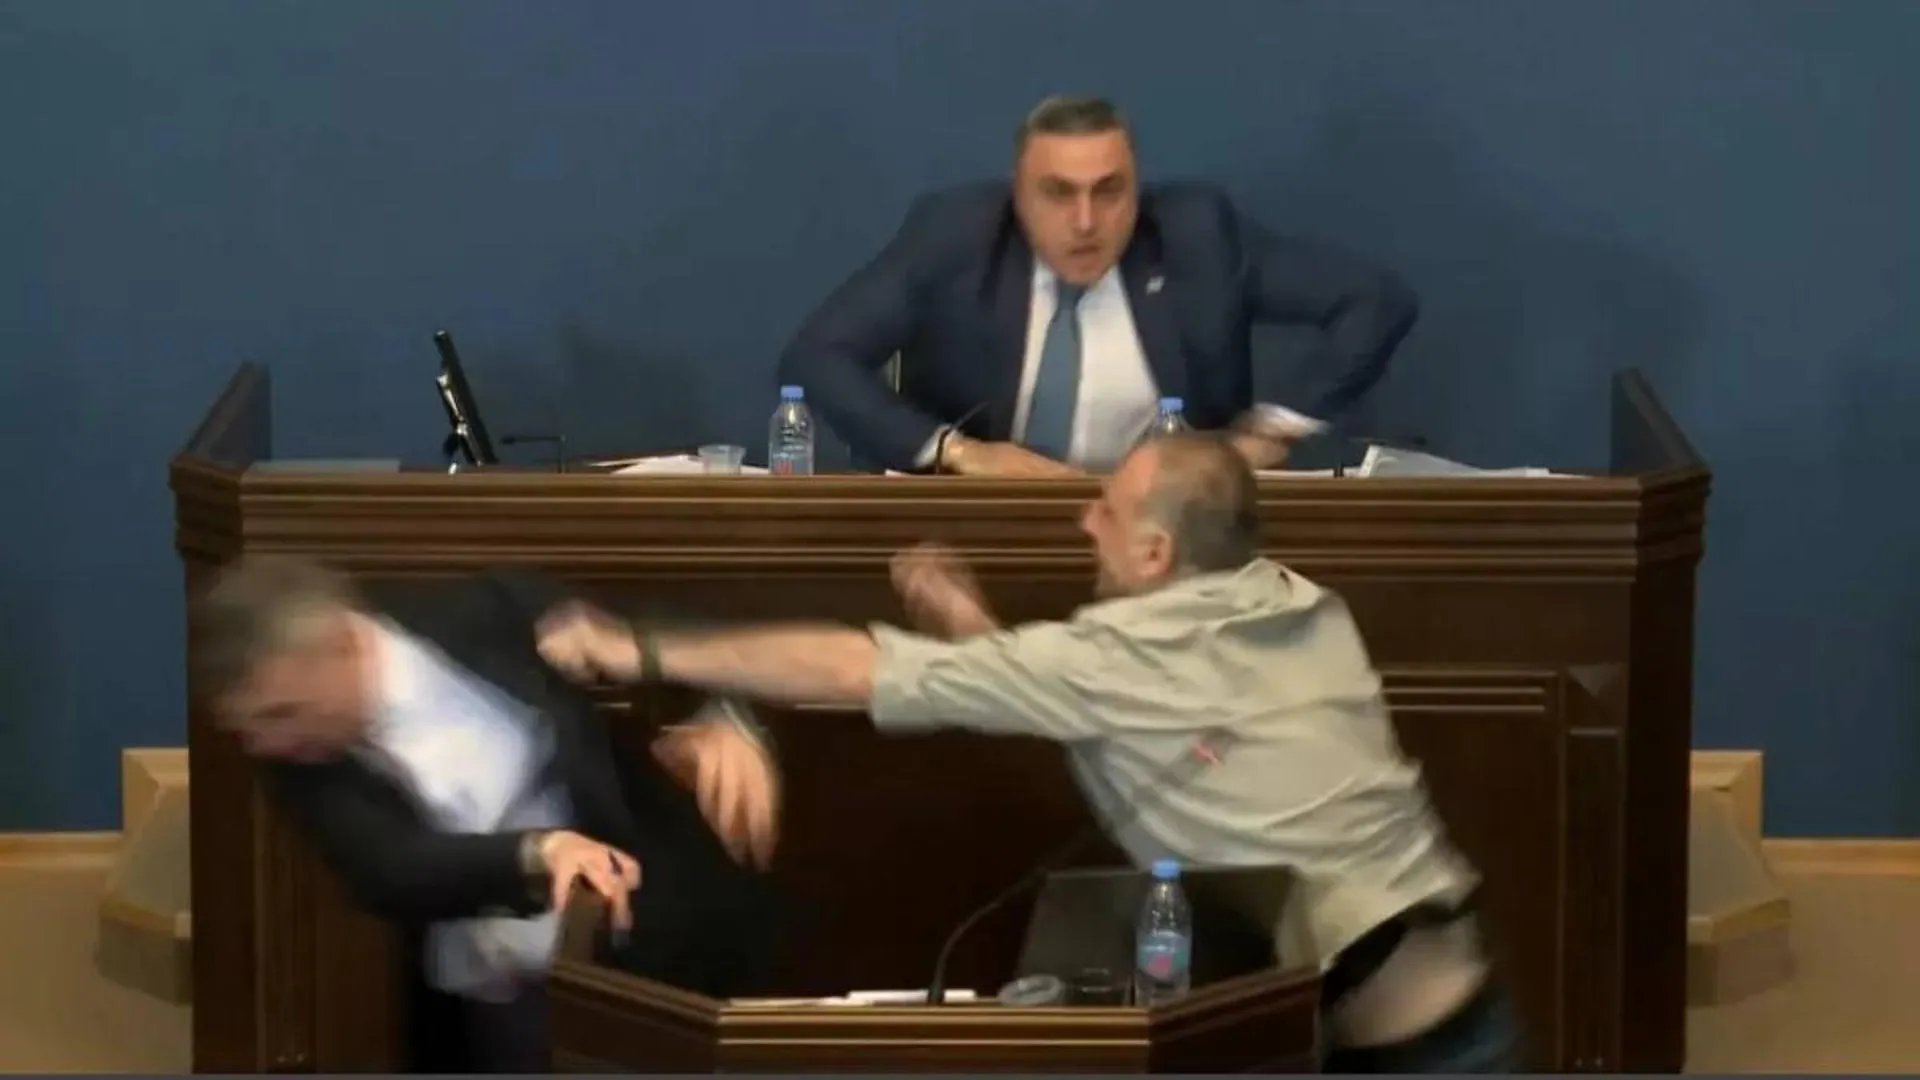 The opposition leader hits the speaker of the Parliament in Georgia |  The truth